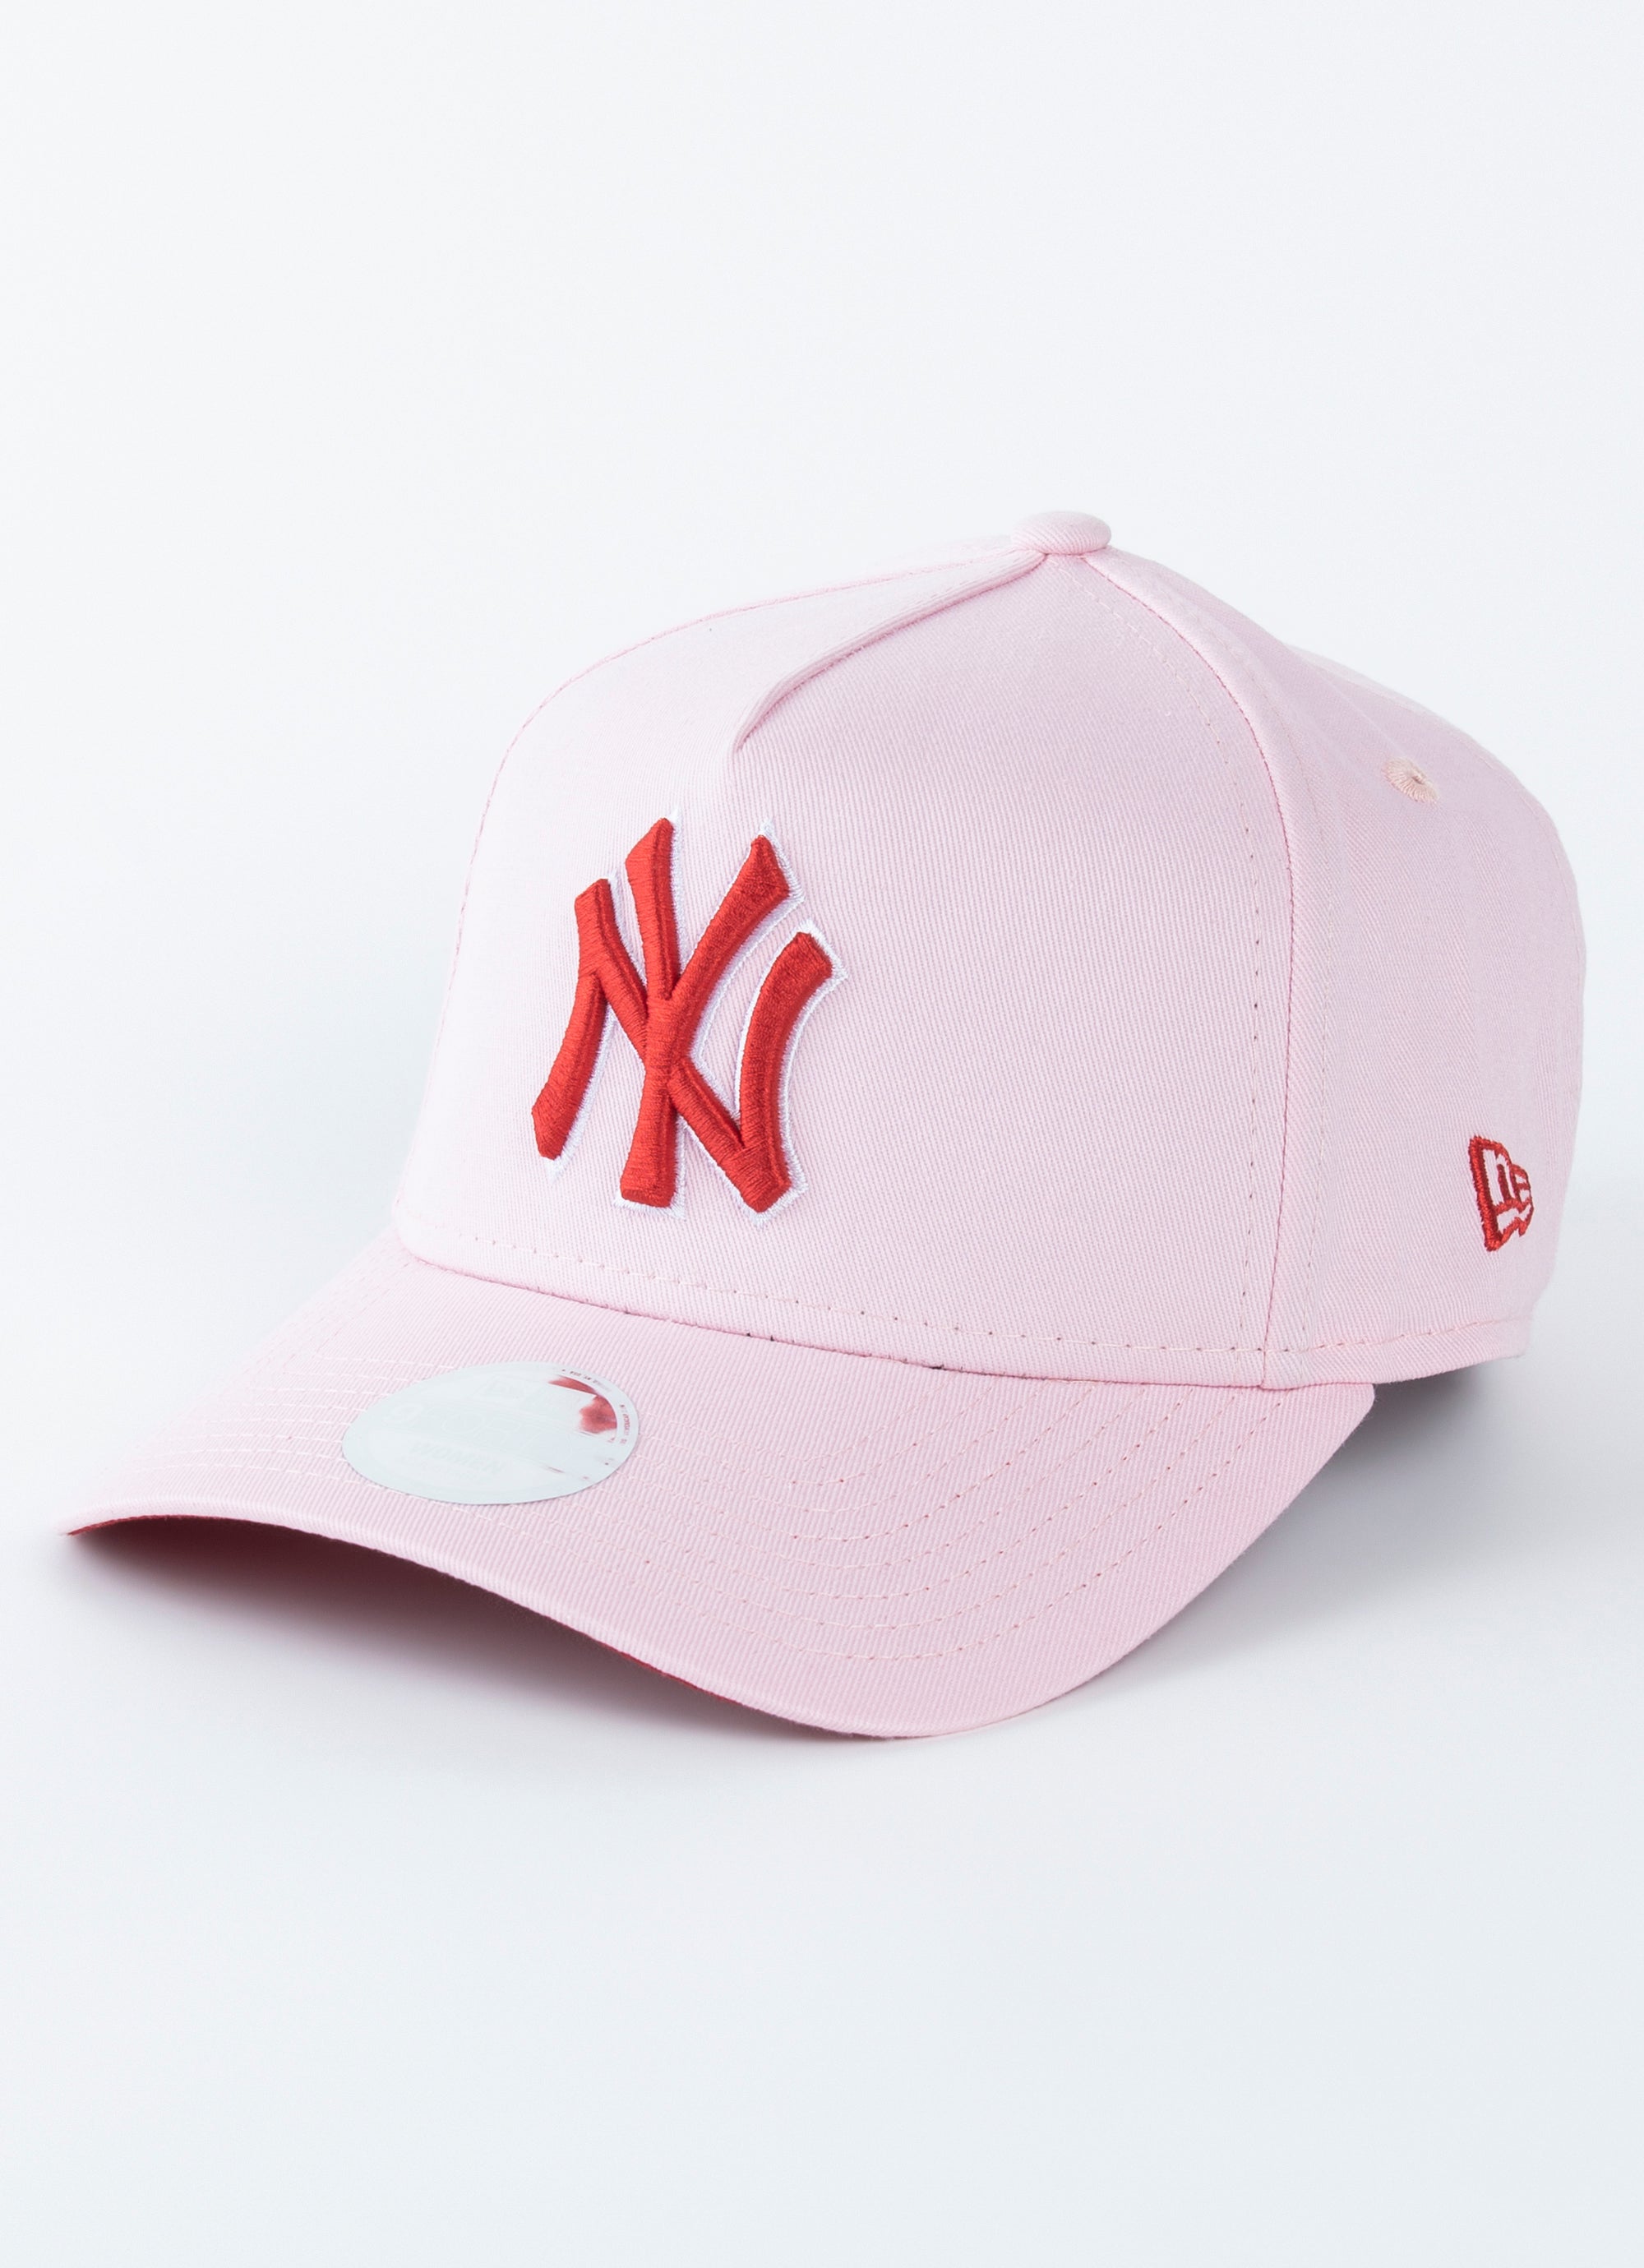 Kodai Senga 34  Team Issued Pink and Grey Mothers Day Hat  2023 Season   New York Mets Auctions